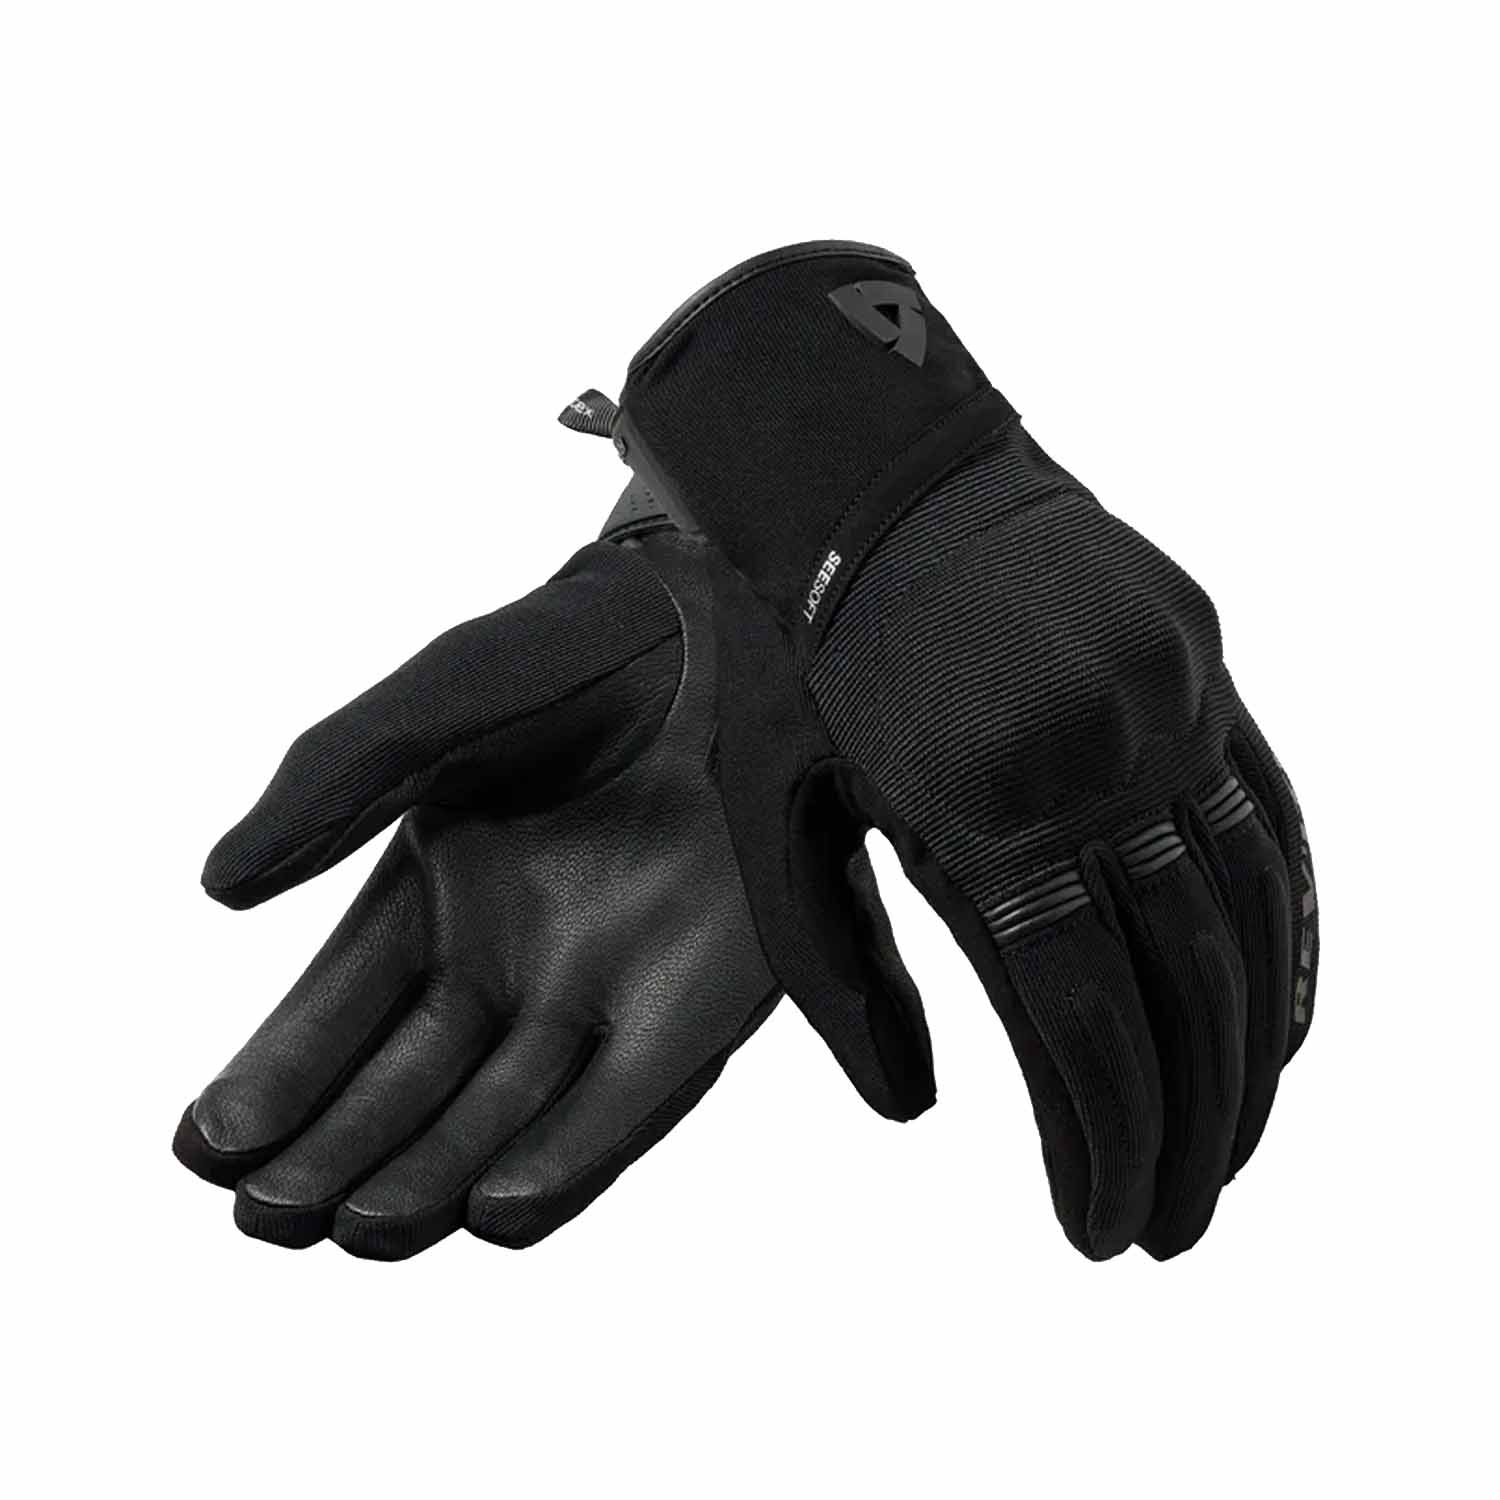 Image of REV'IT! Mosca 2 H2O Gloves Ladies Black Taille XXS